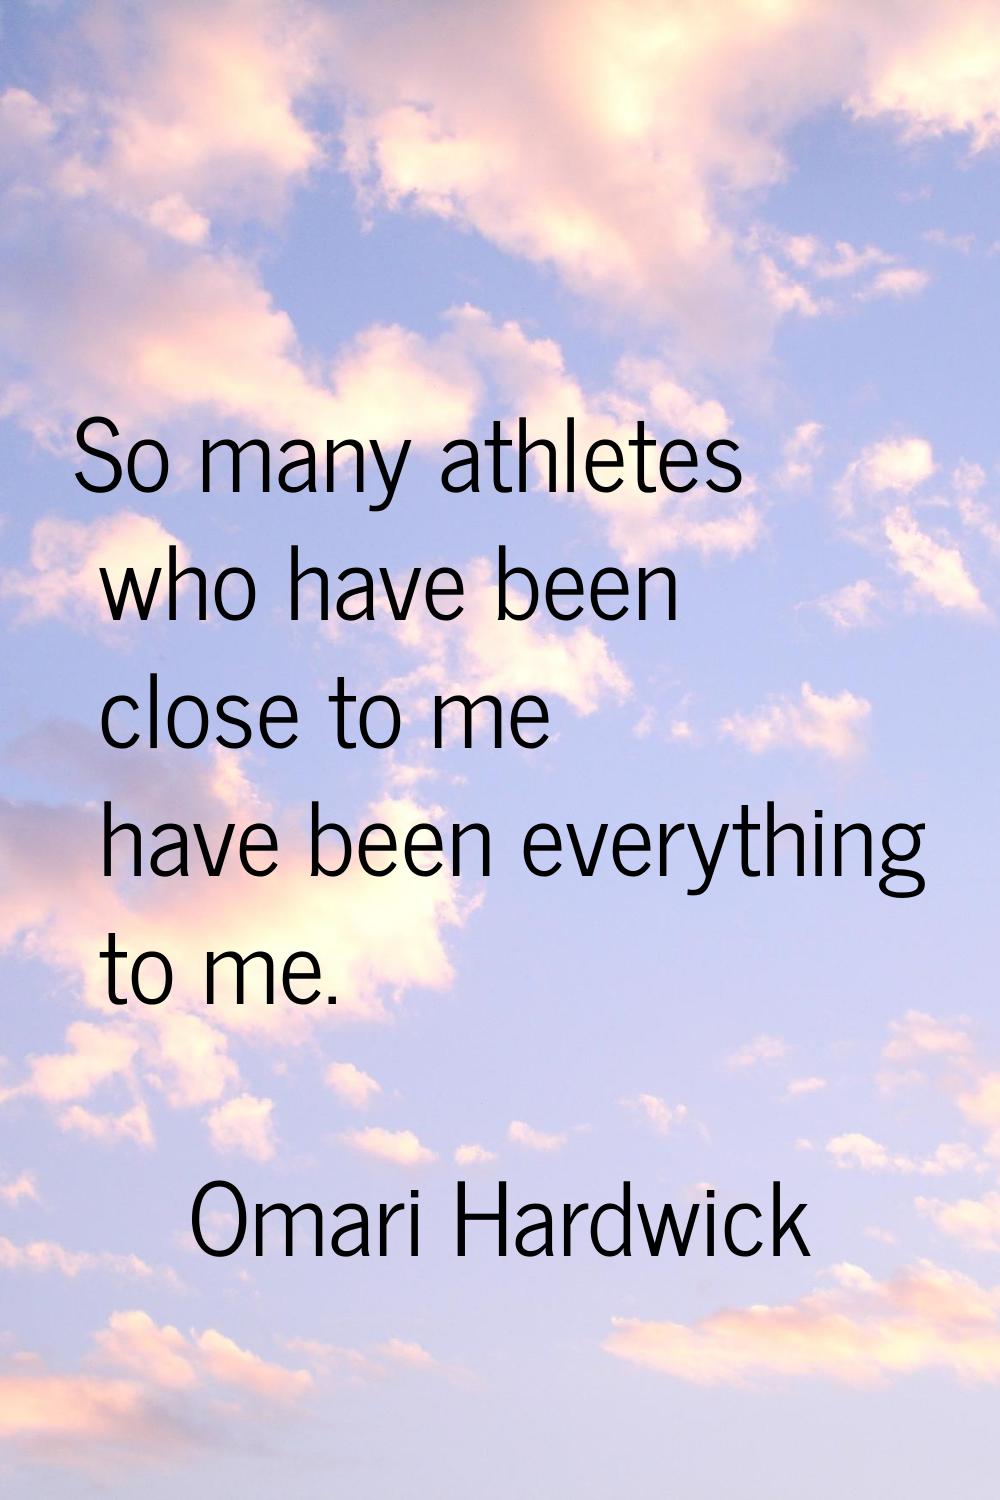 So many athletes who have been close to me have been everything to me.